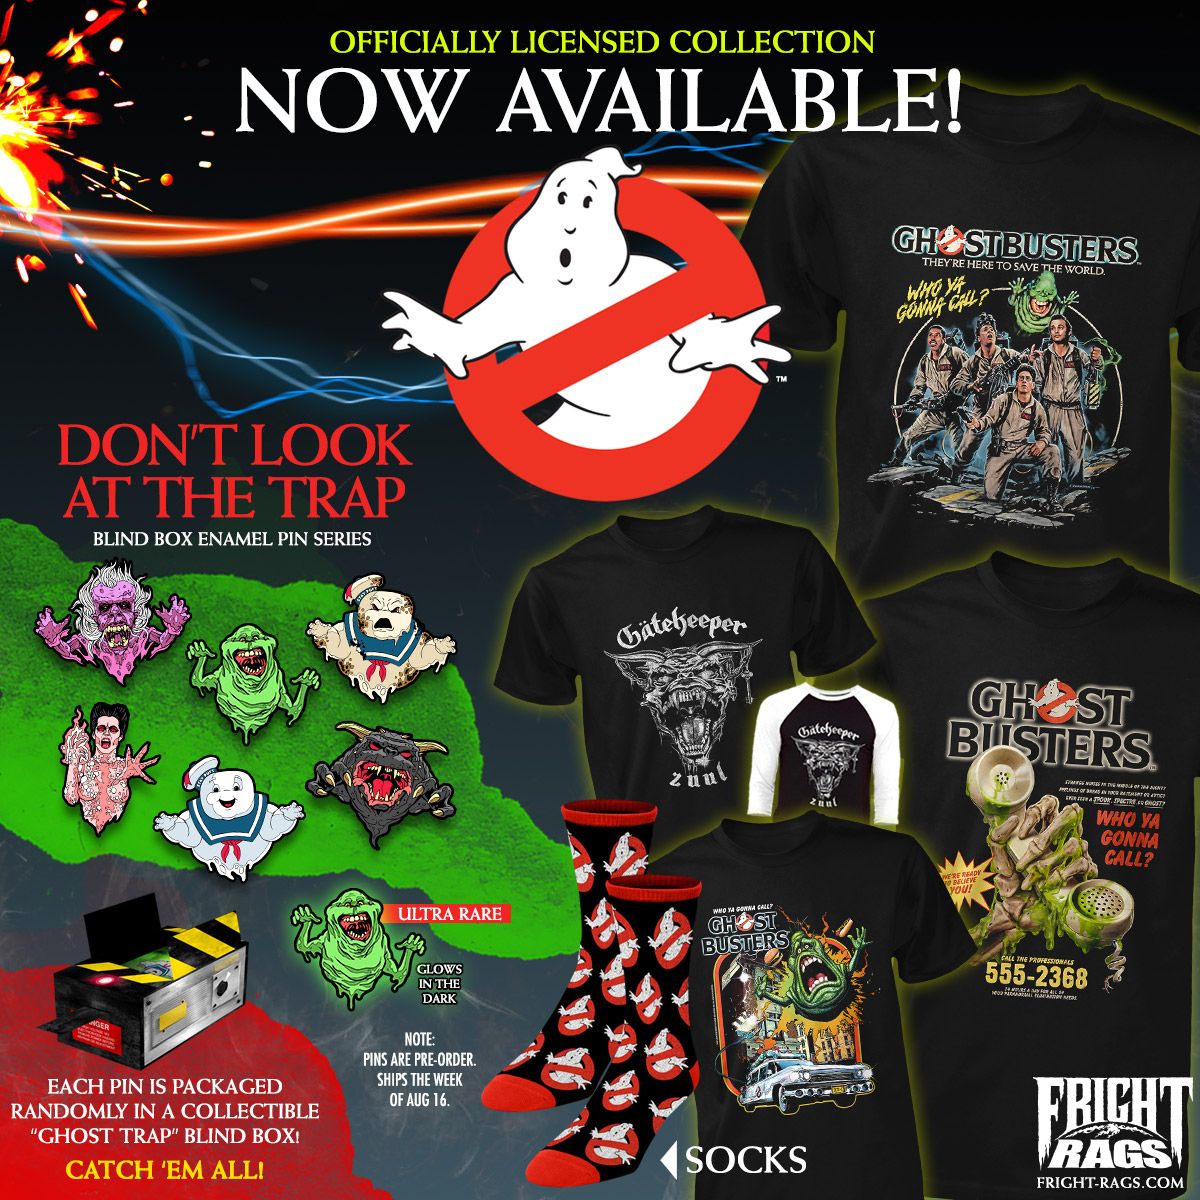 Ghostbusters Fright-Rags Collection